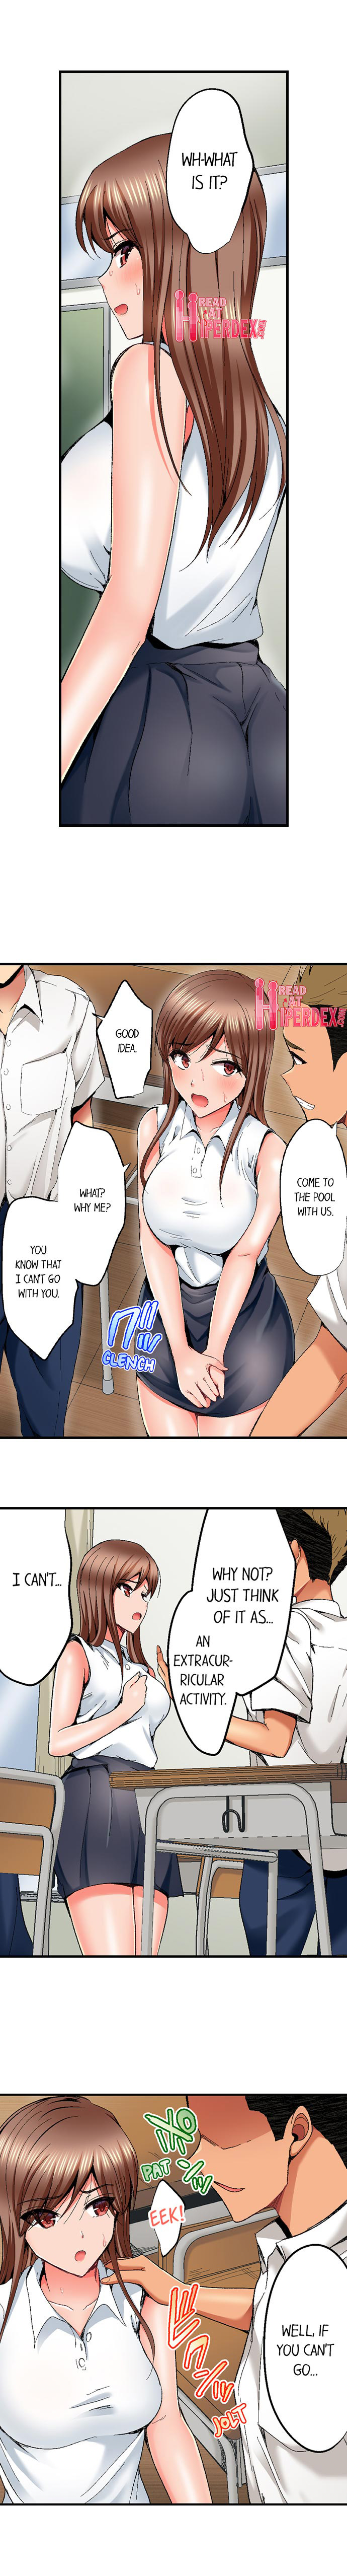 Netorare My Teacher With My Friends - Chapter 12 Page 3